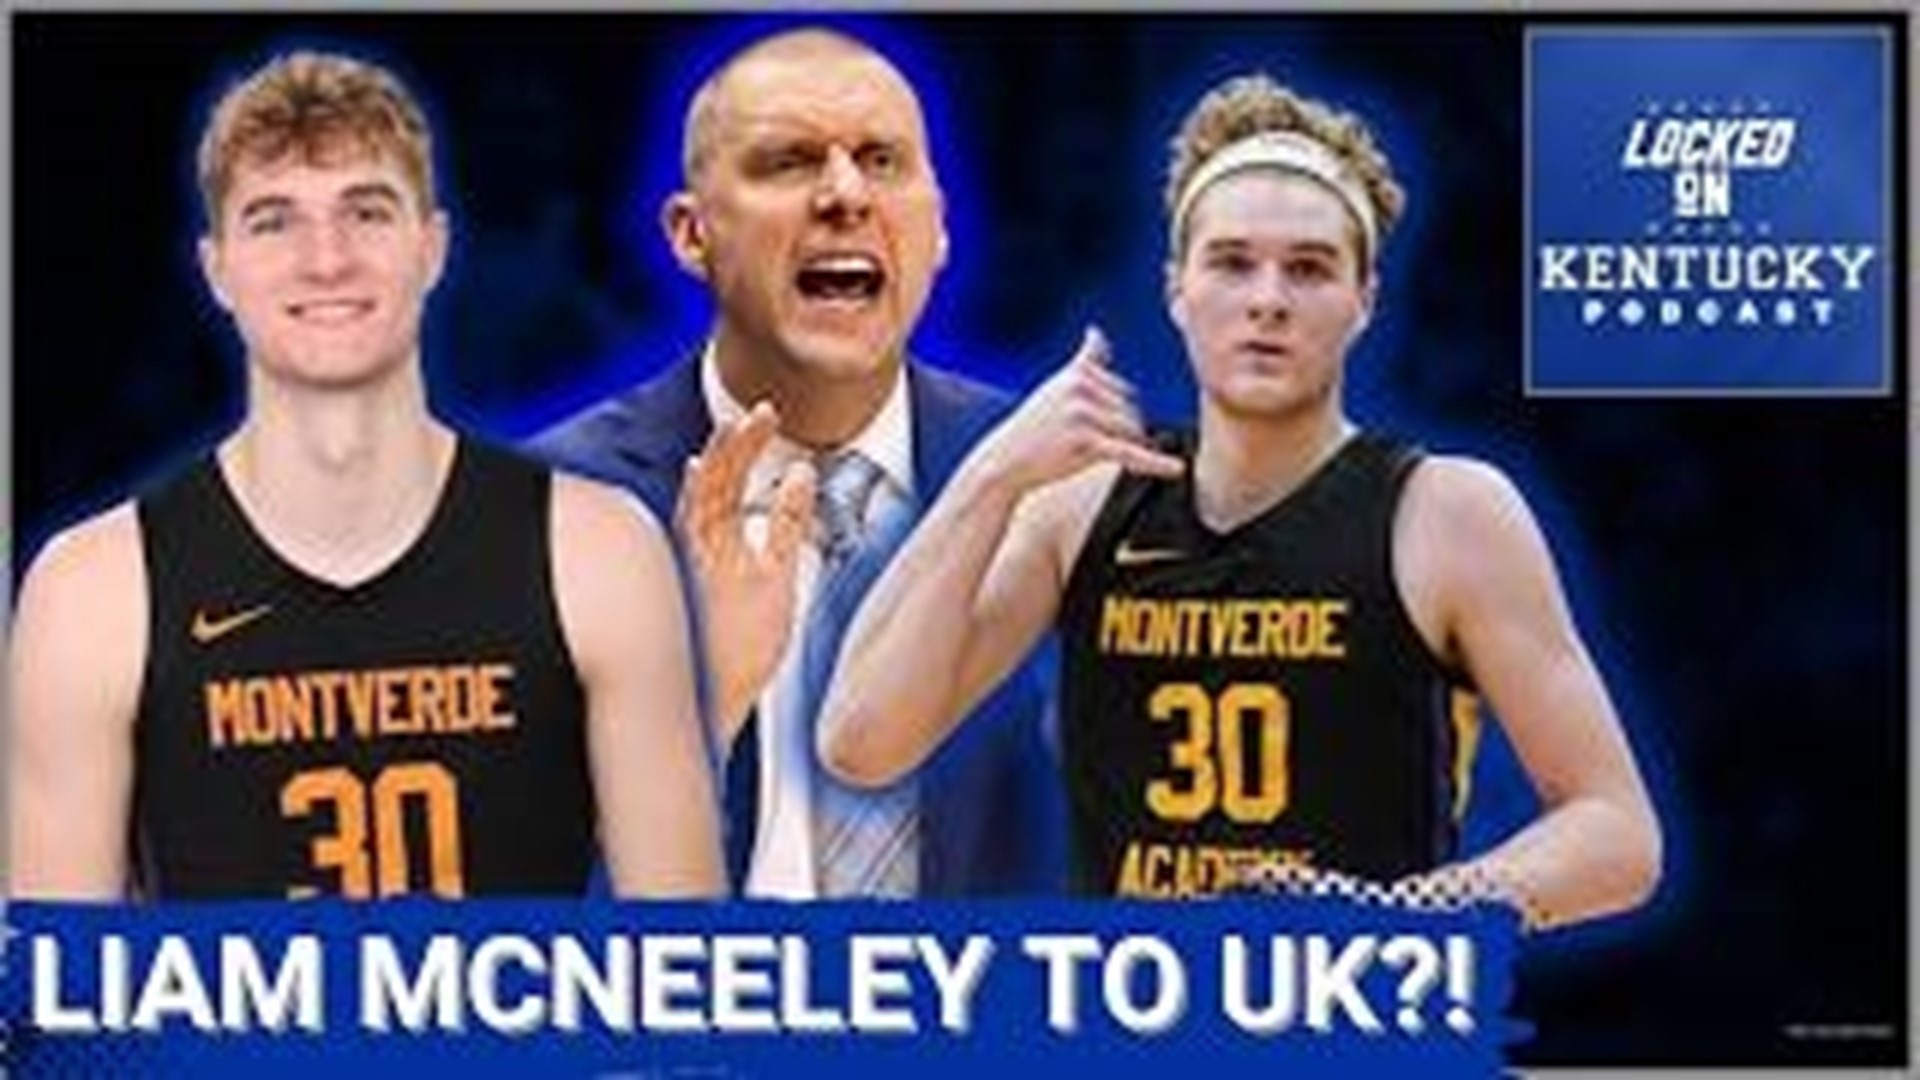 Liam McNeeley has been contacted by Mark Pope and Kentucky basketball.